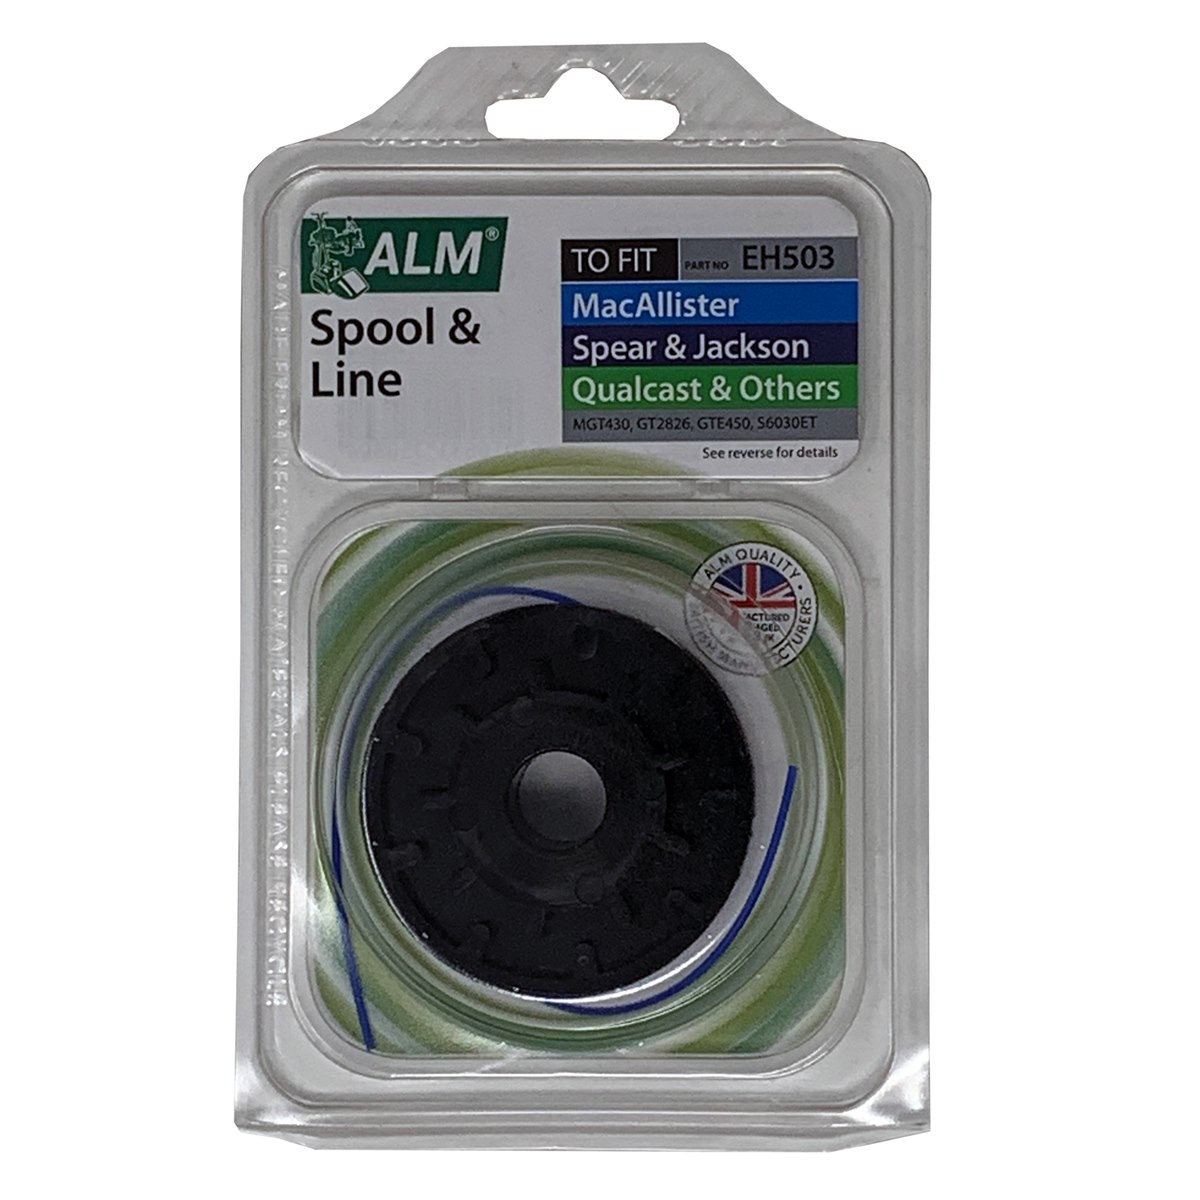 ALM EH503 Spool and line for MacAllister, Spear and Jackson, Qualcast and Others